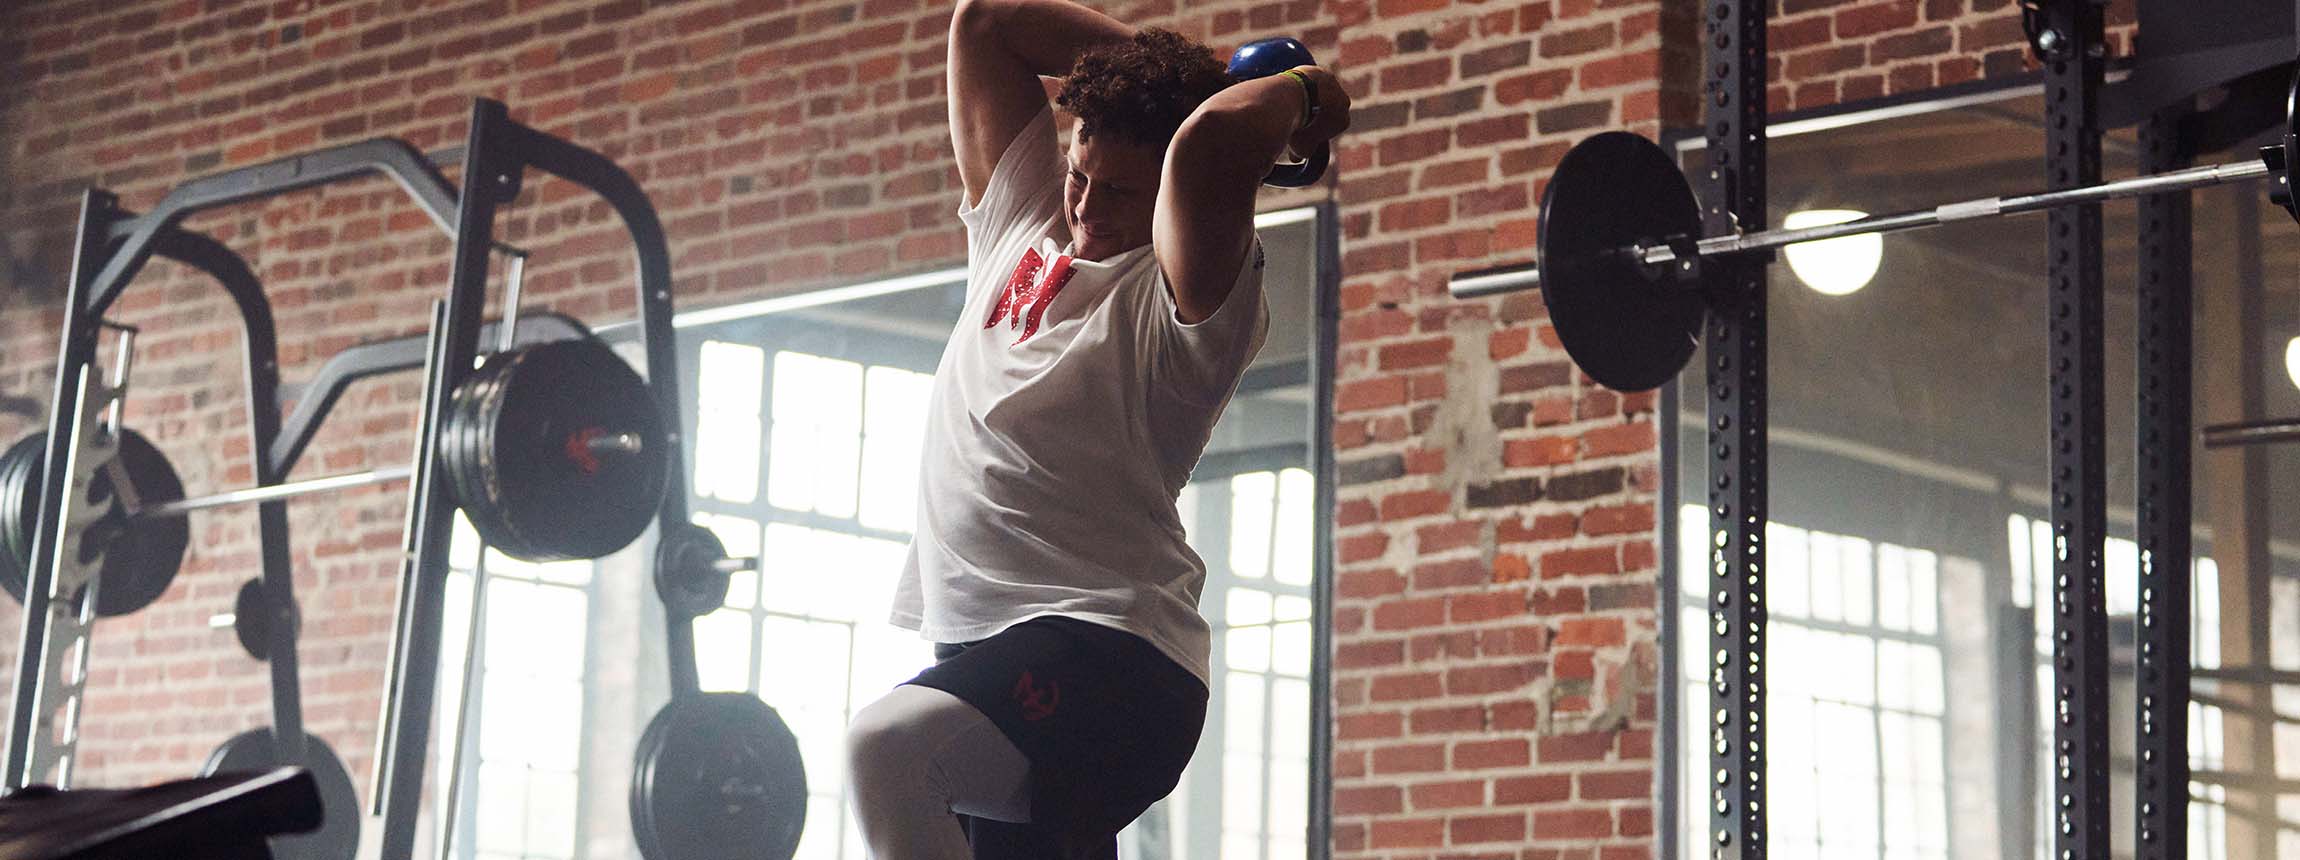 Patrick mahomes in training at the gym